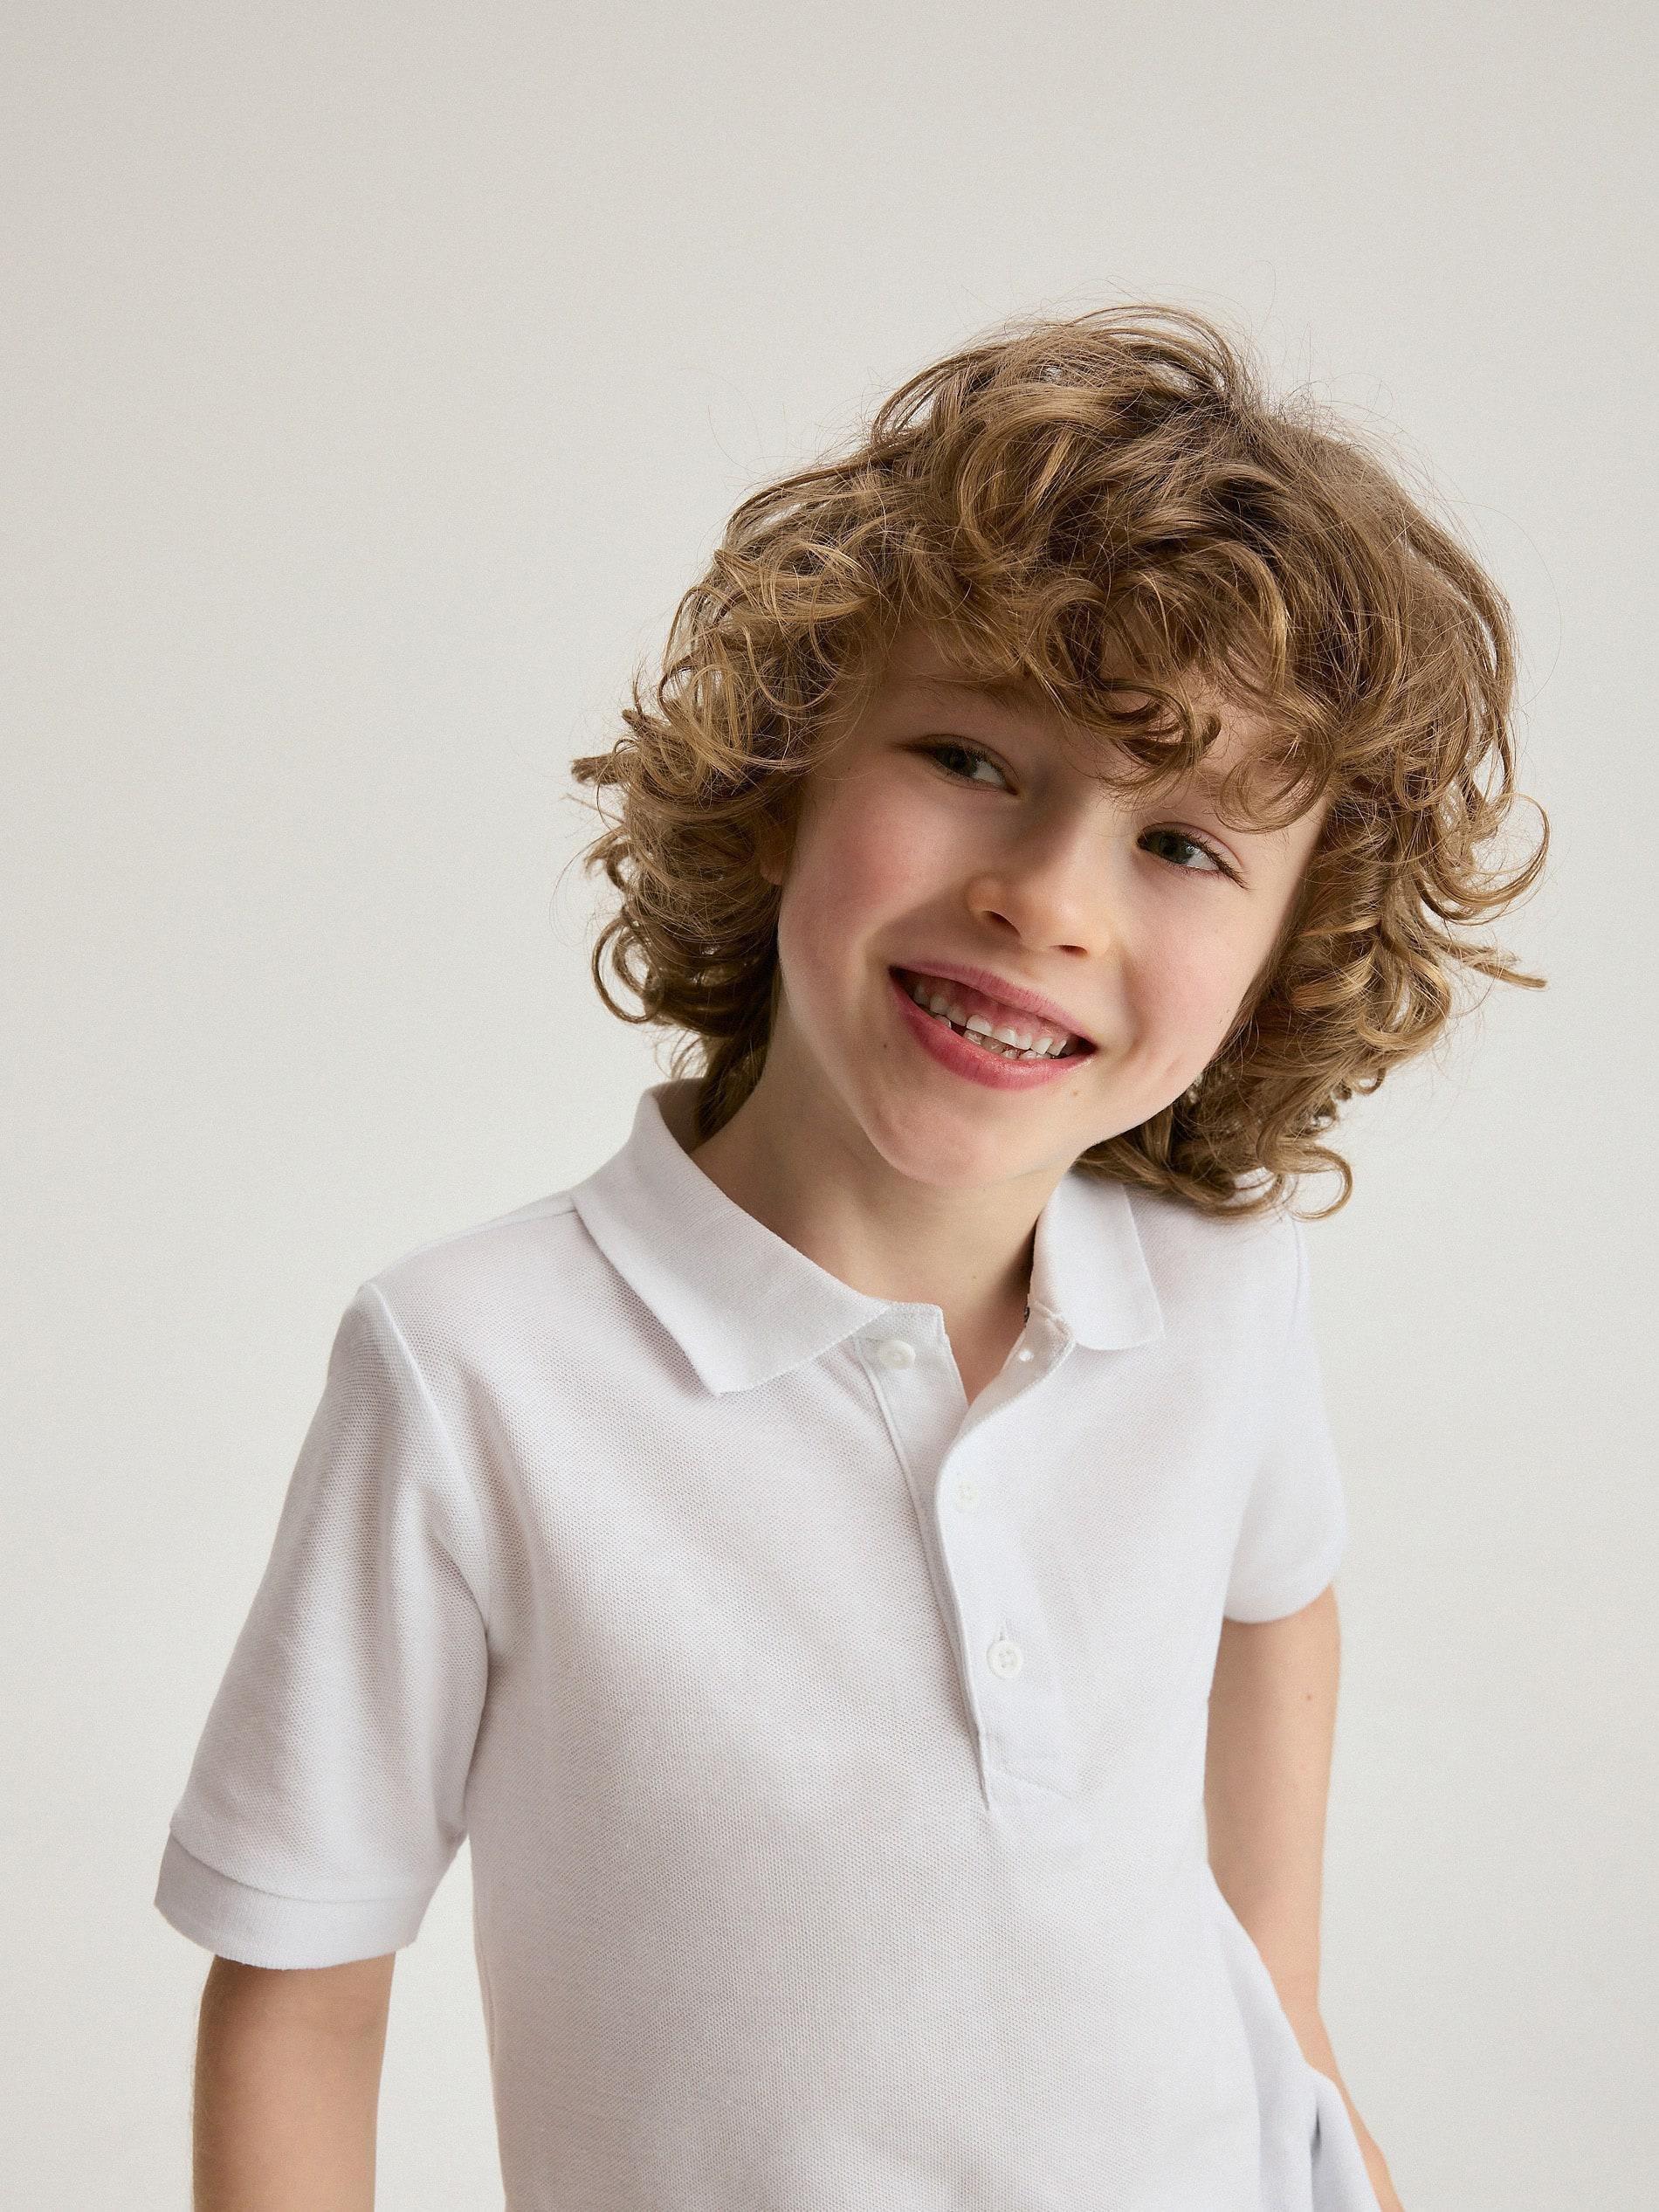 Reserved - White Polo T-Shirt, Kids Boys